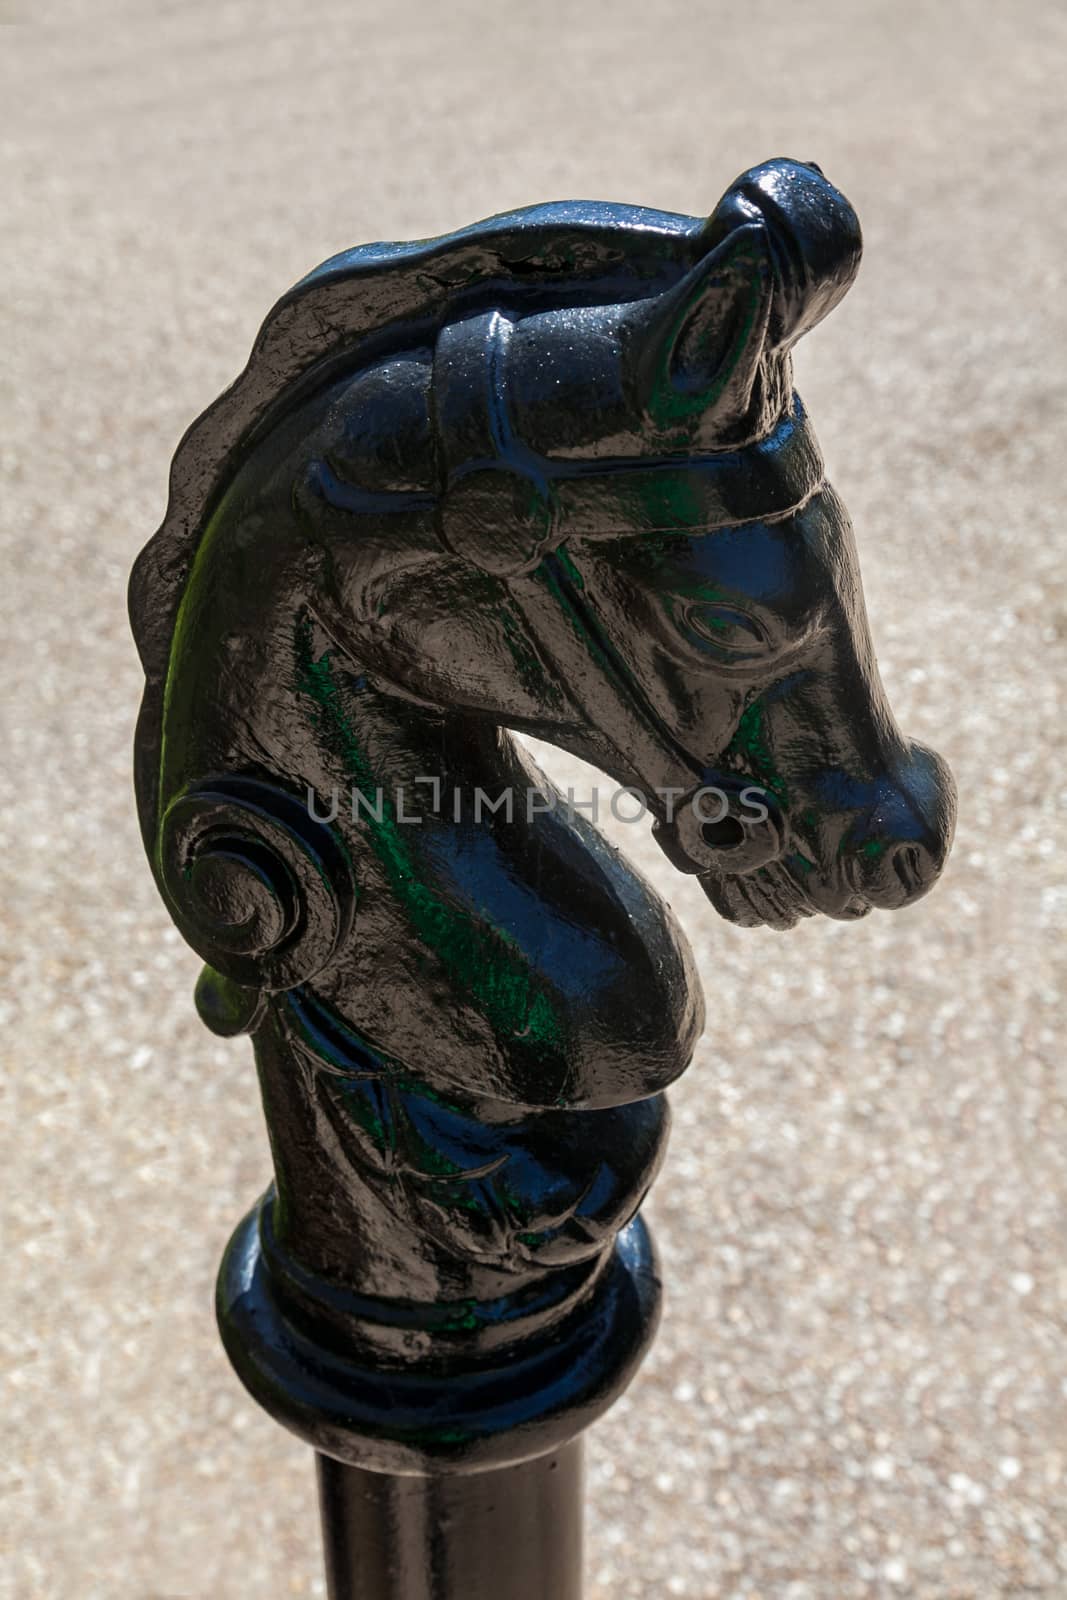 A black statue of the head of a horse